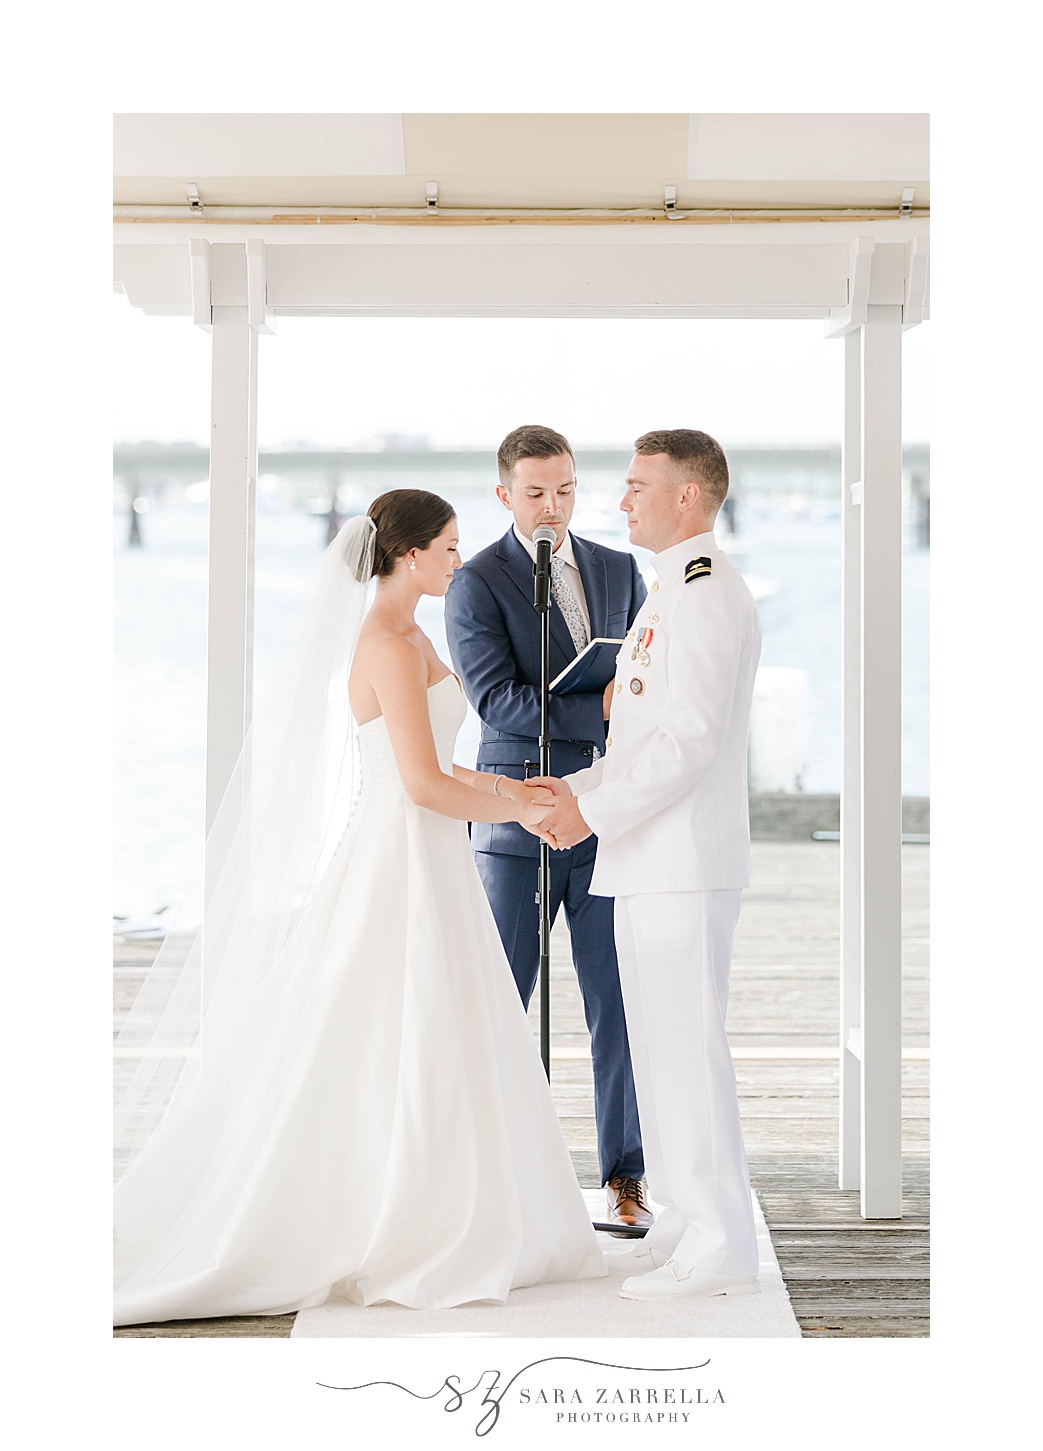 newlyweds hold hands during wedding ceremony at Regatta Place